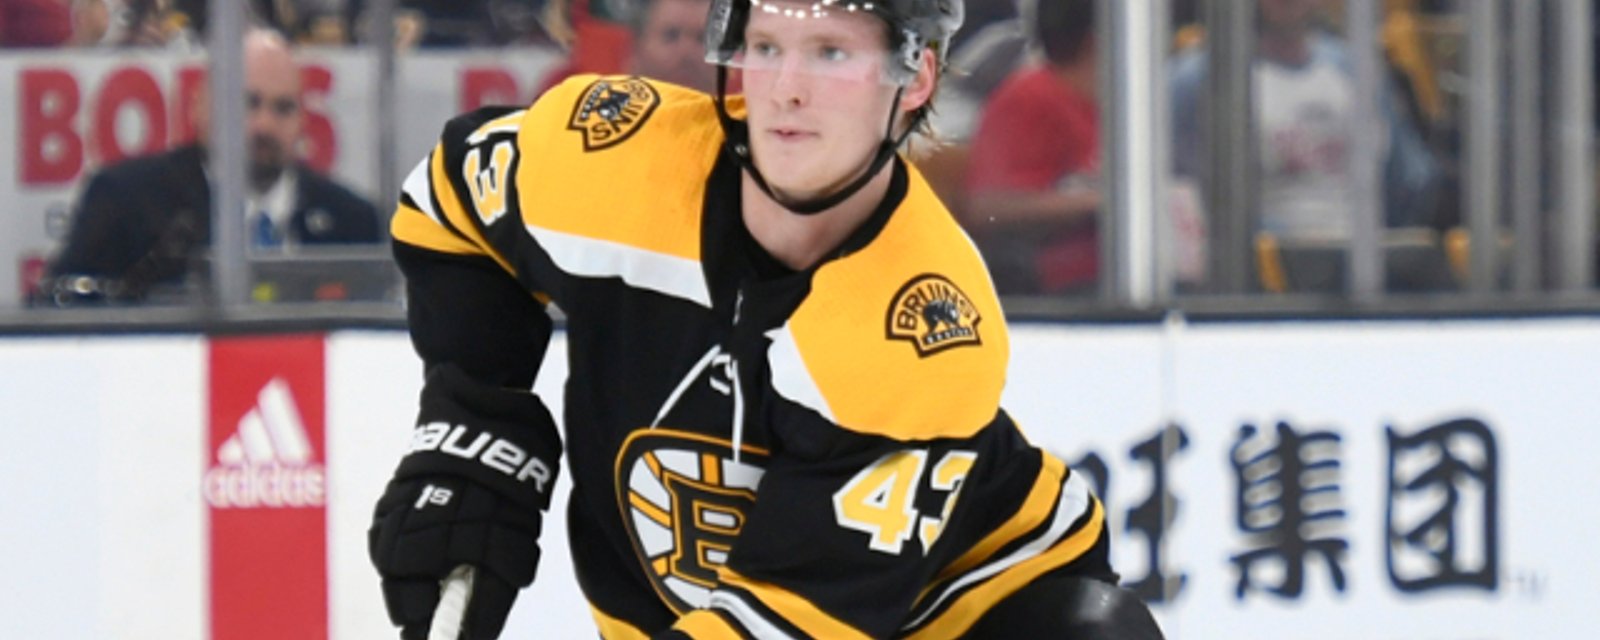 Bruins sign Heinen late in the night 